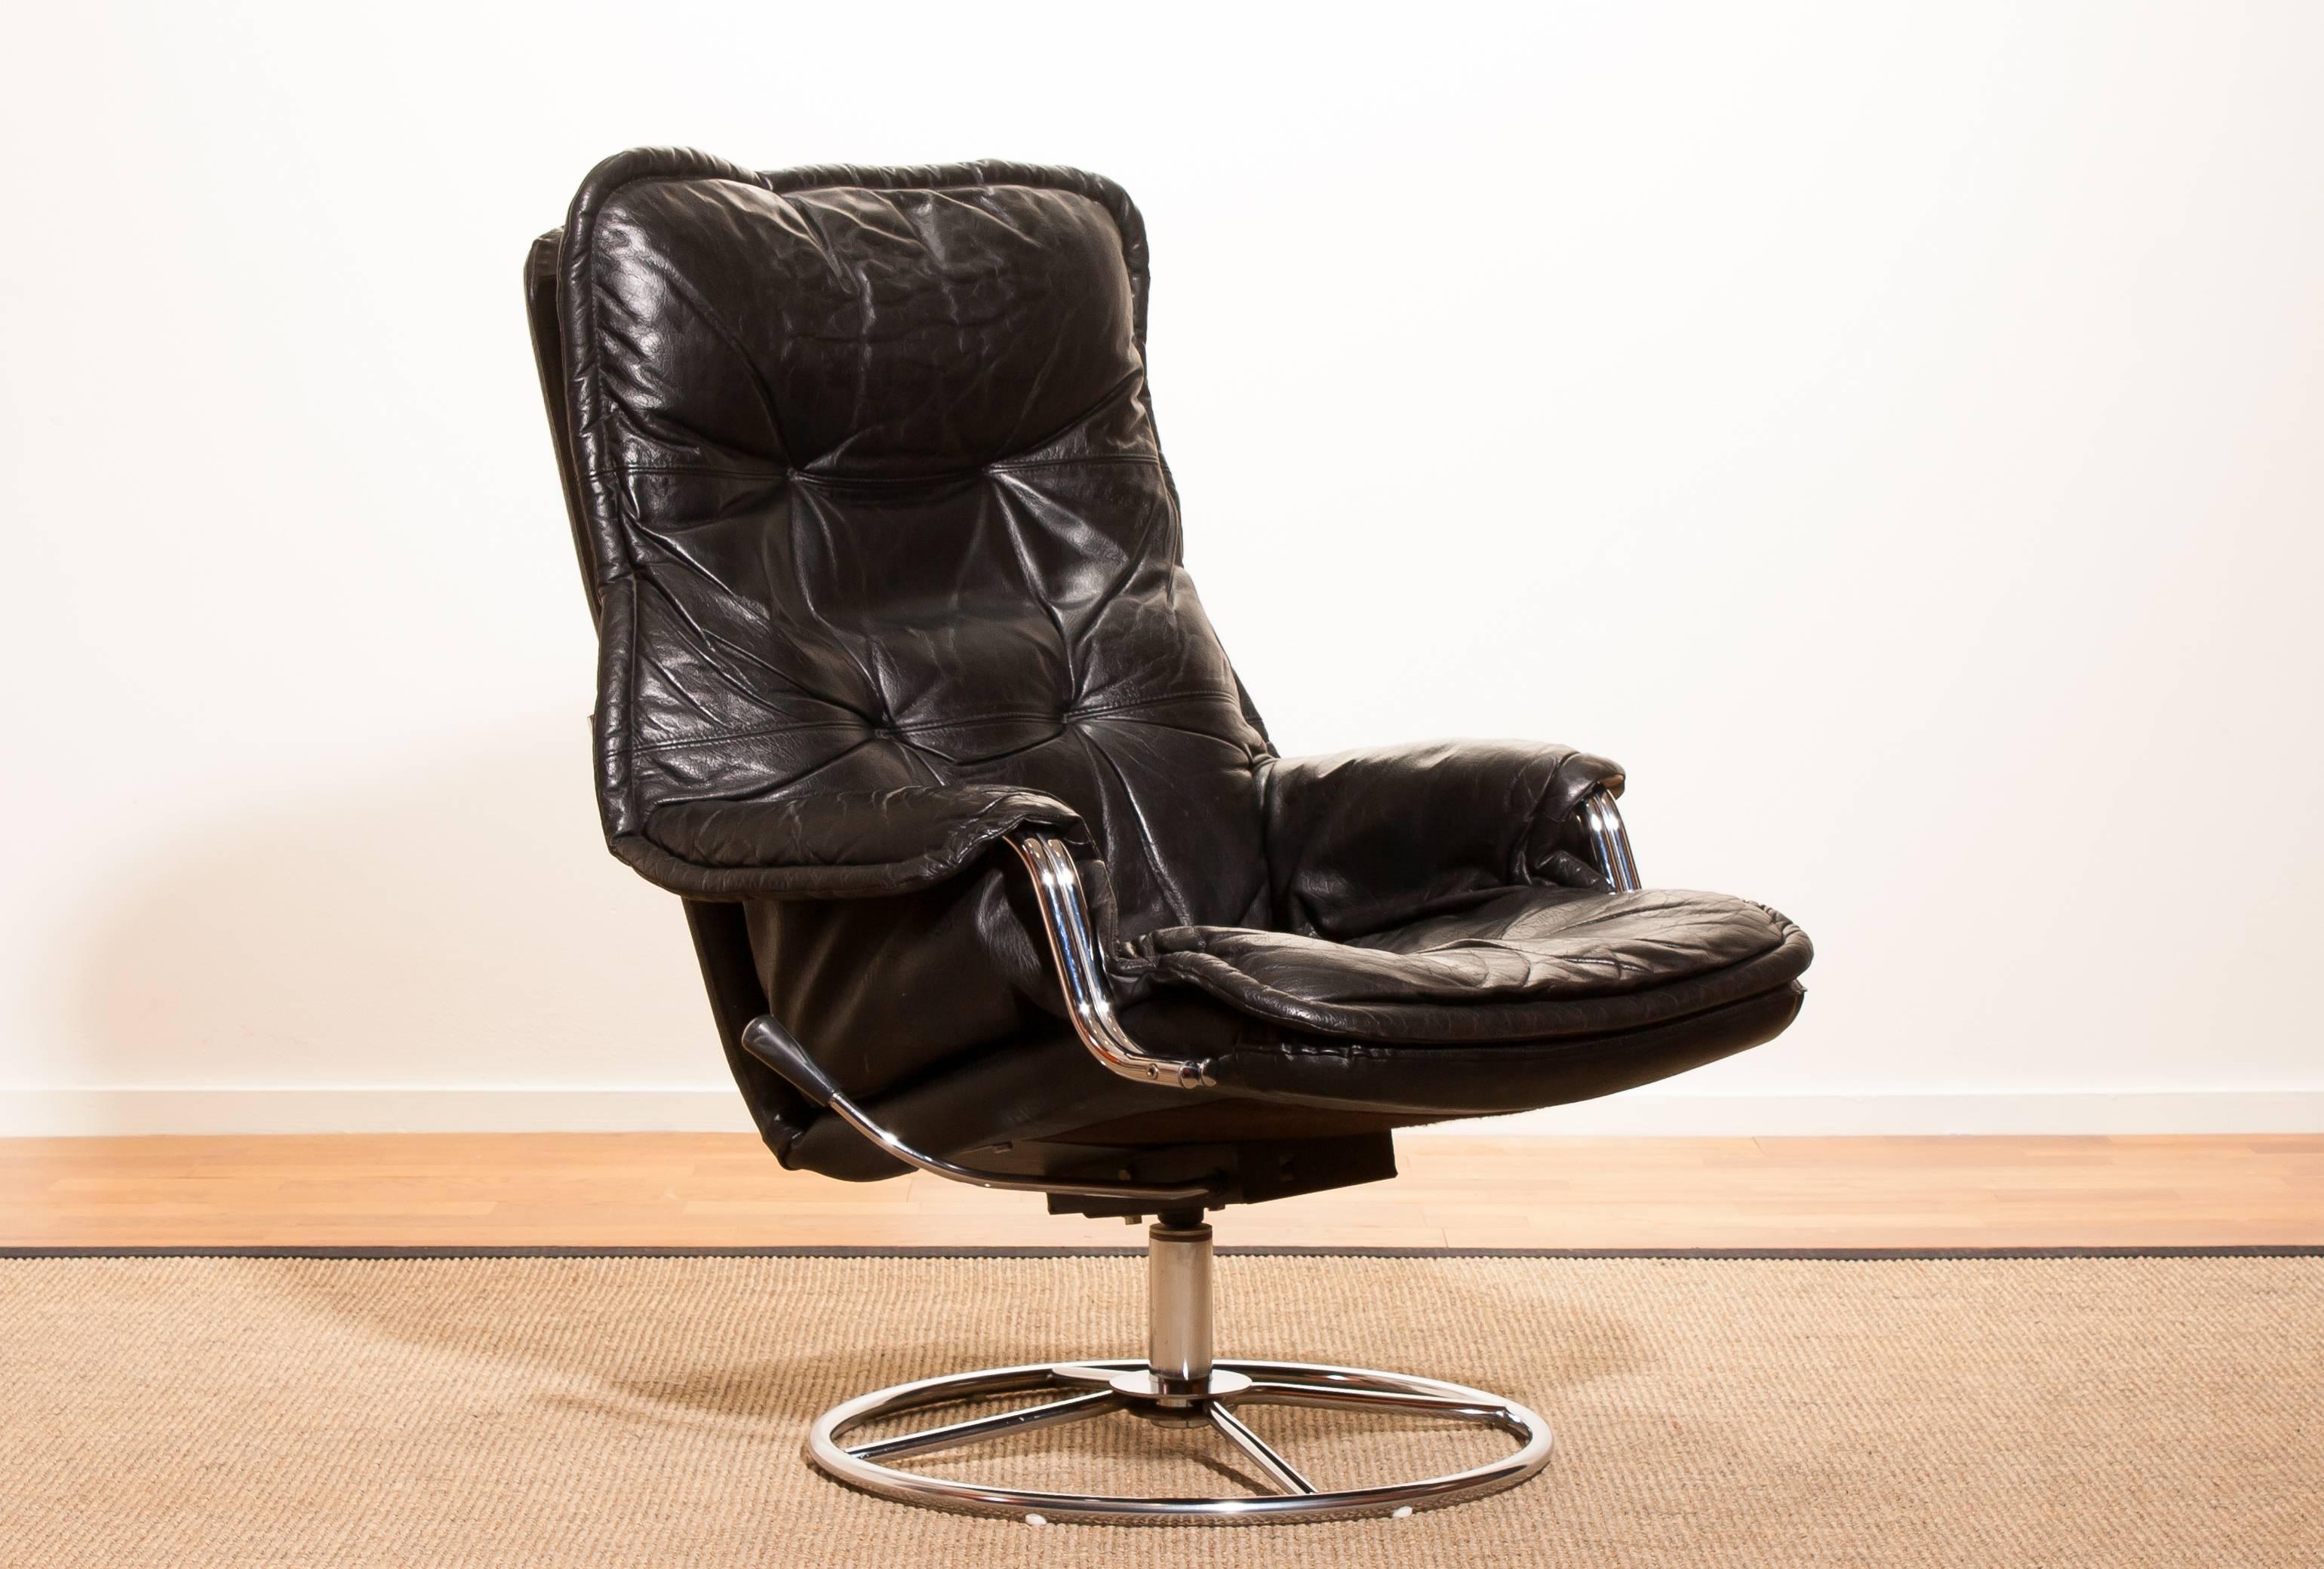 Beautiful lounge chair made in Sweden.
This very nice design chair has a black leather seating and armrests on a swivel chrome steel frame.
It is in a wonderful condition.
Period 1970s.
Dimensions: H 94 cm x W 68 cm x D 72 cm x SH 40.